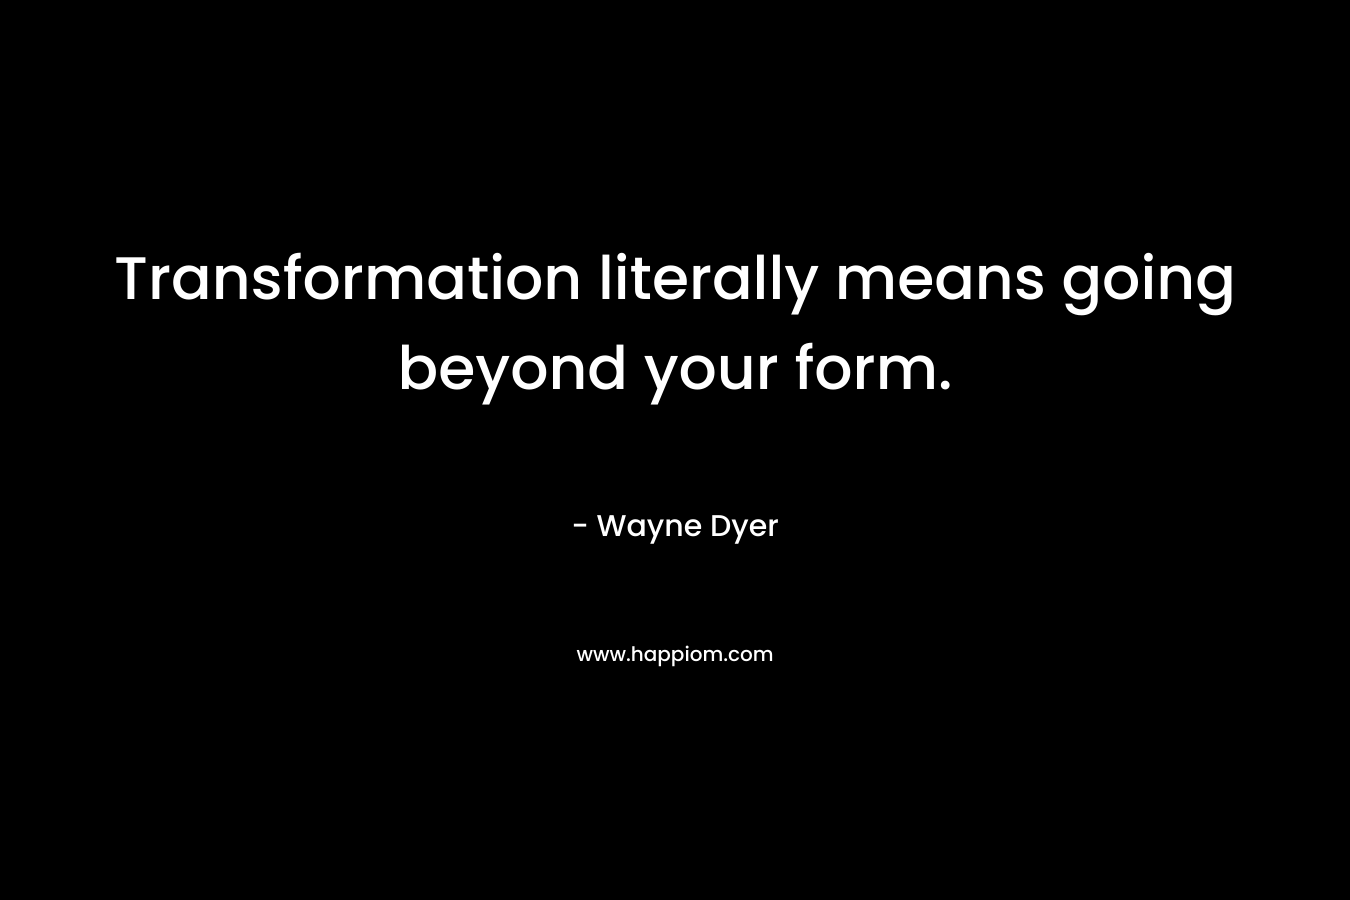 Transformation literally means going beyond your form. – Wayne Dyer